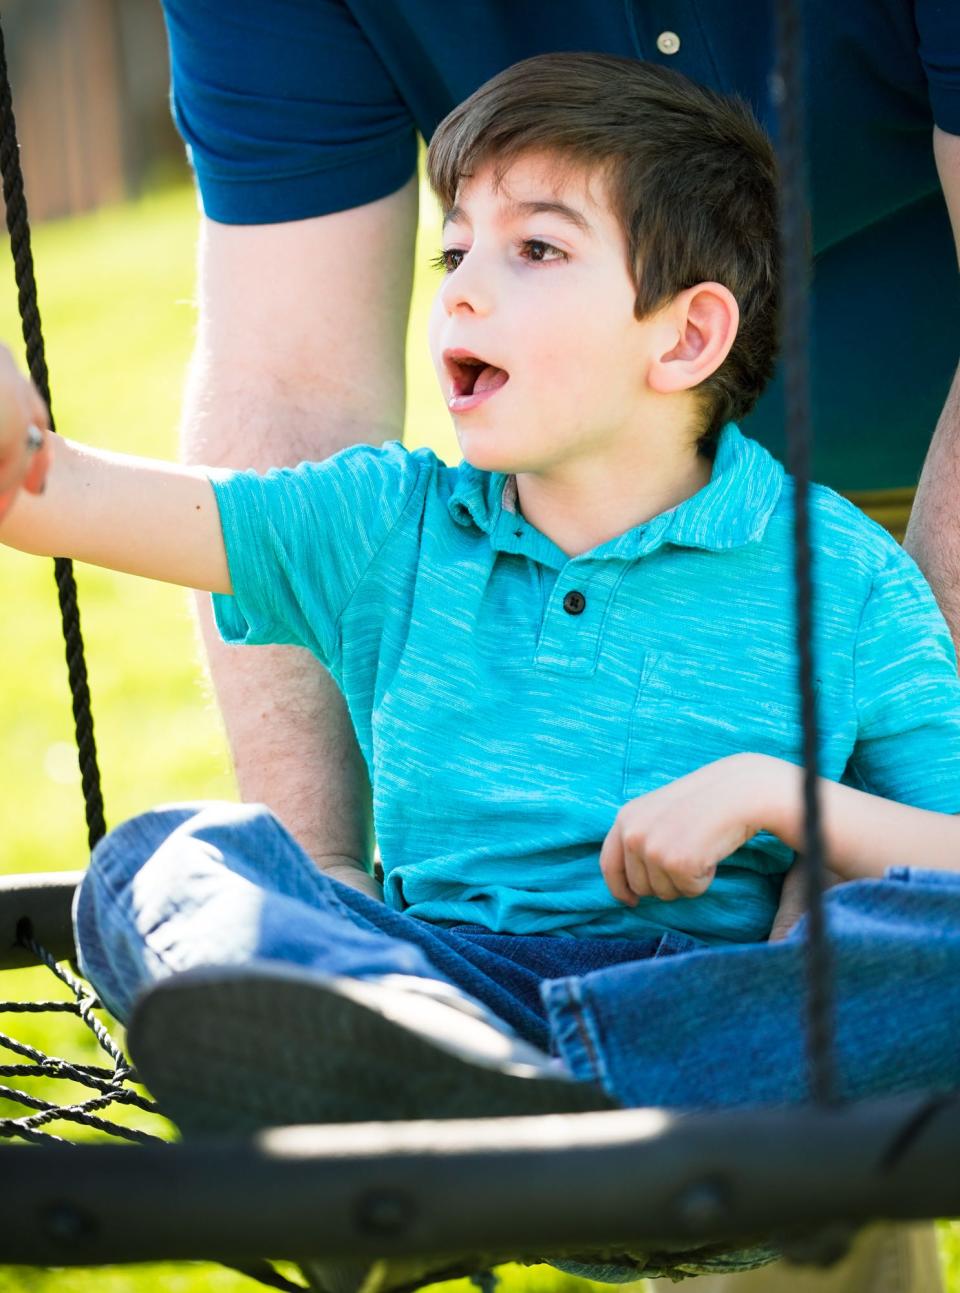 Ryder Harris plays on his home swing set with the assistance of his father Chris Harris, on Thursday, April 13, 2023 in Indiana. Ryder has a lifelong disorder called Polymicrogyria (PMG,) and epilepsy. The Harris family hopes a service dog would help to predict Ryder's seizures. 